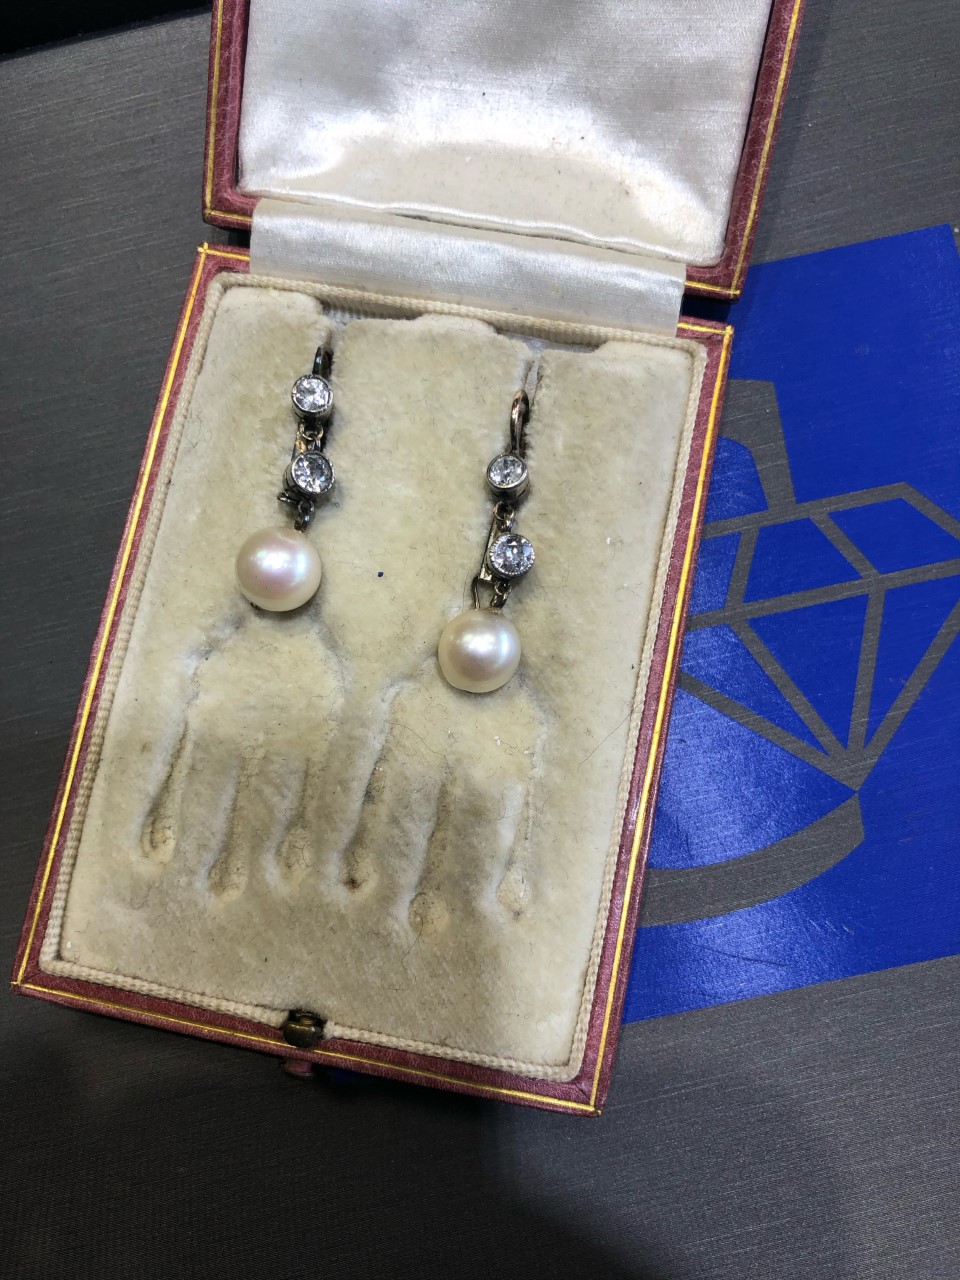 Antique Diamond Drop Earrings Collectors Coins & Jewelry Lynbrook (516)341-7355